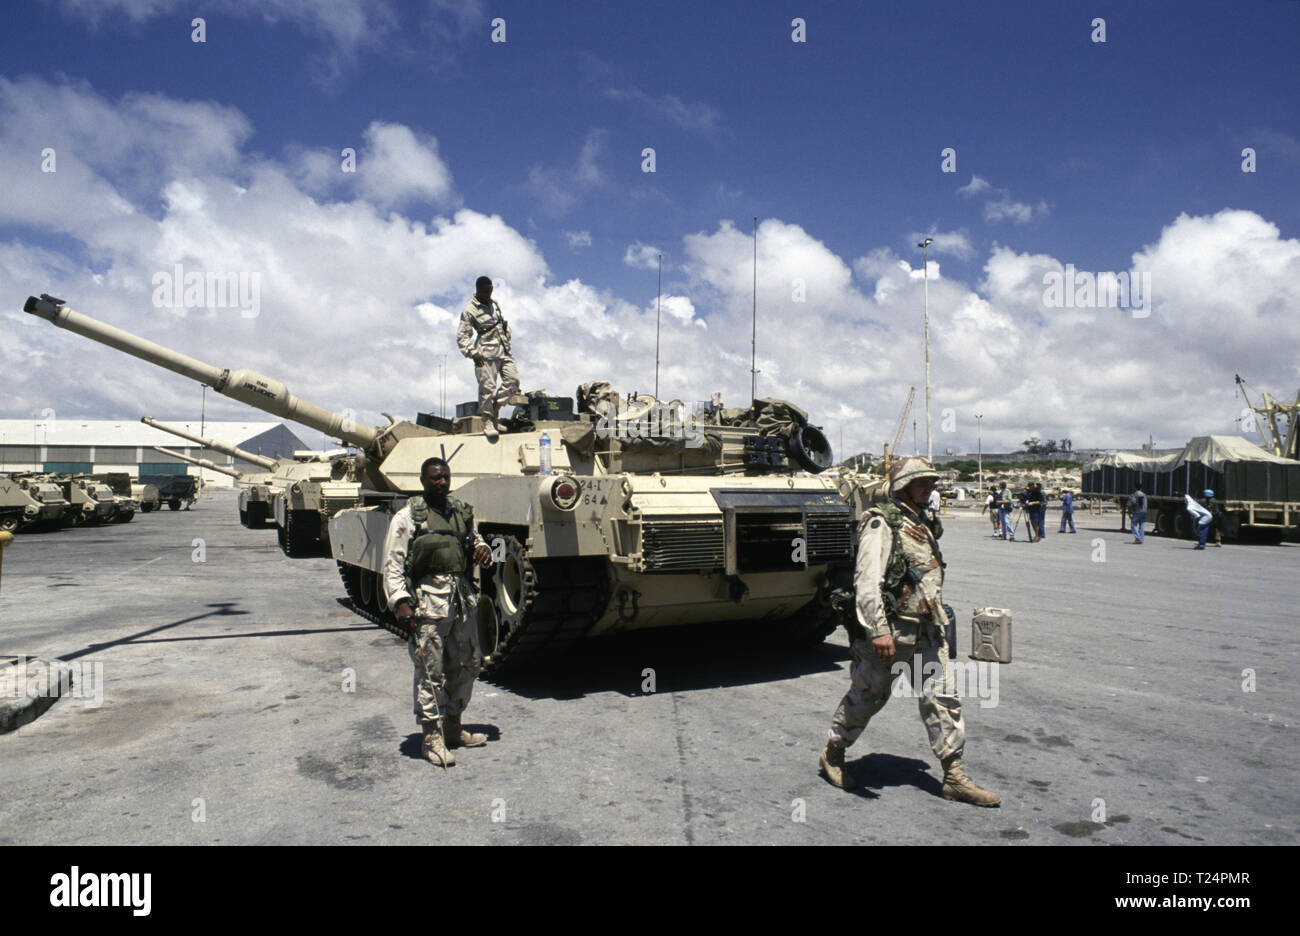 30th October 1993 U.S. Army M1A1 Abrams tanks of the 24th Infantry Division, 1st Battalion of the 64th Armored Regiment, lined up in the new port in Mogadishu, Somalia where they have just arrived by sea. Stock Photo